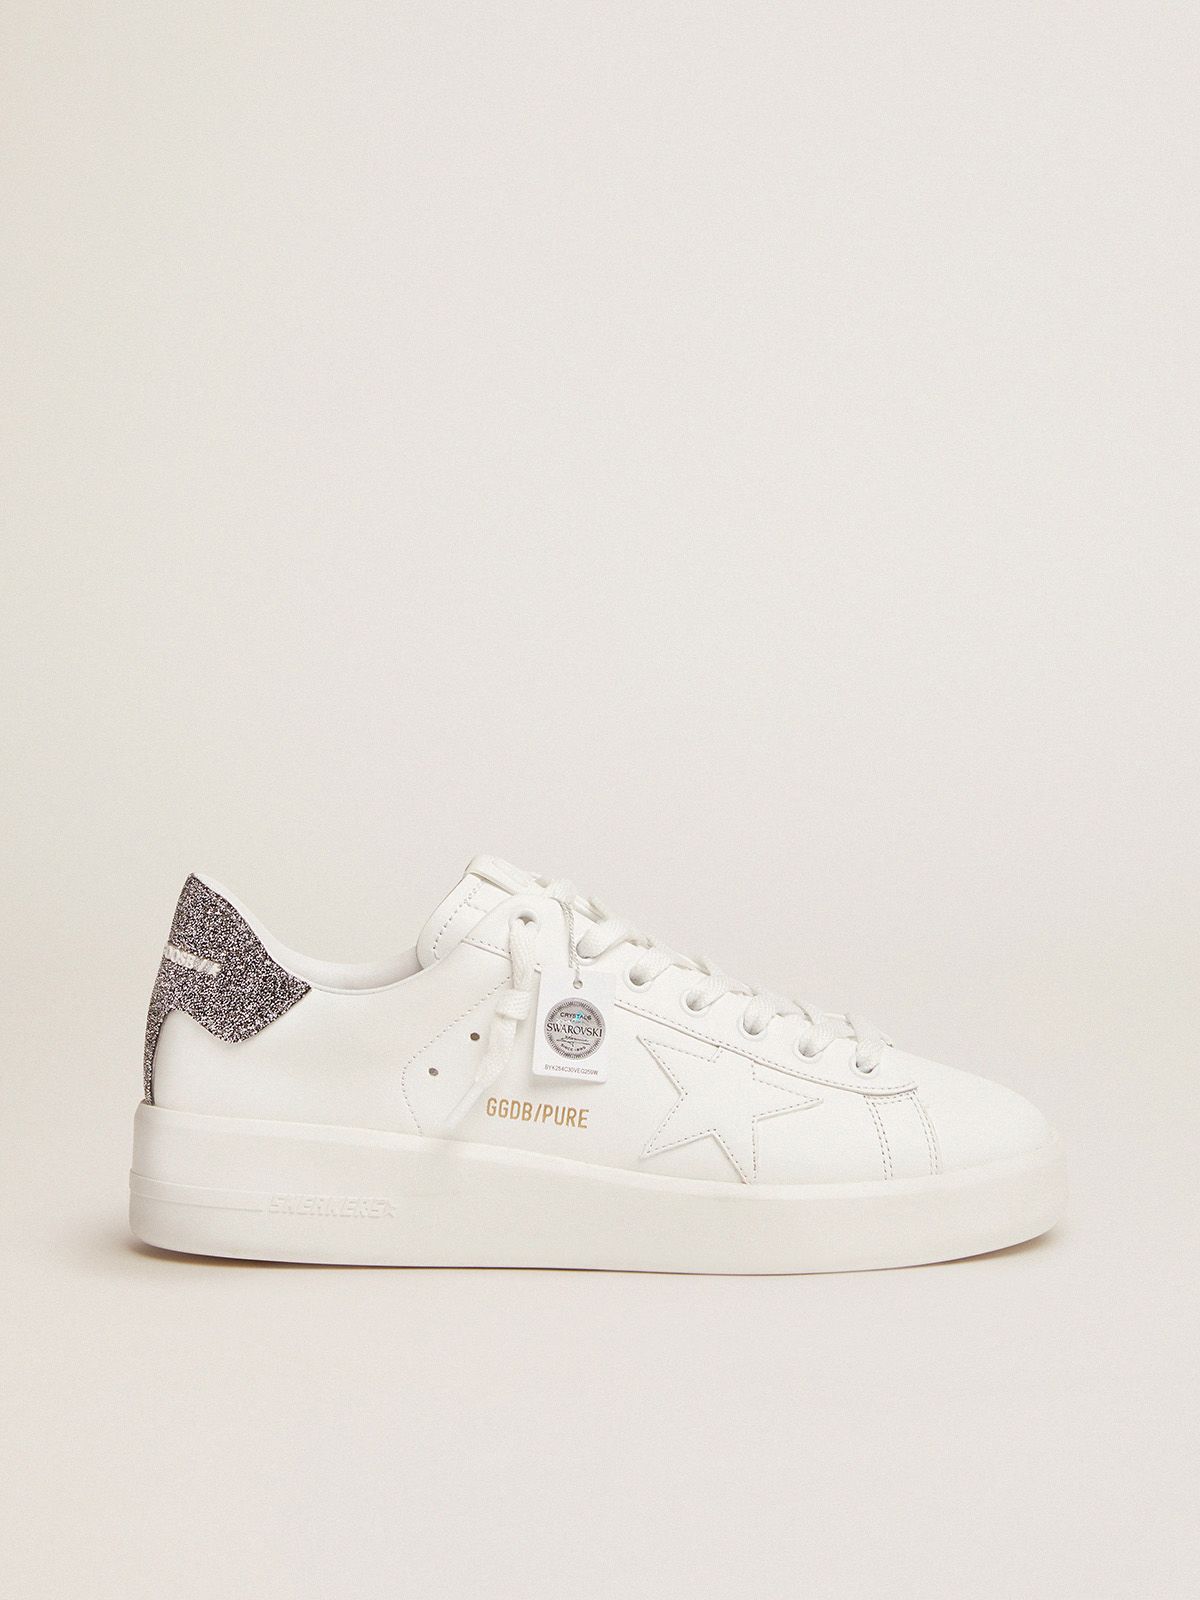 golden goose with crystal leather white heel Purestar tab silver in sneakers